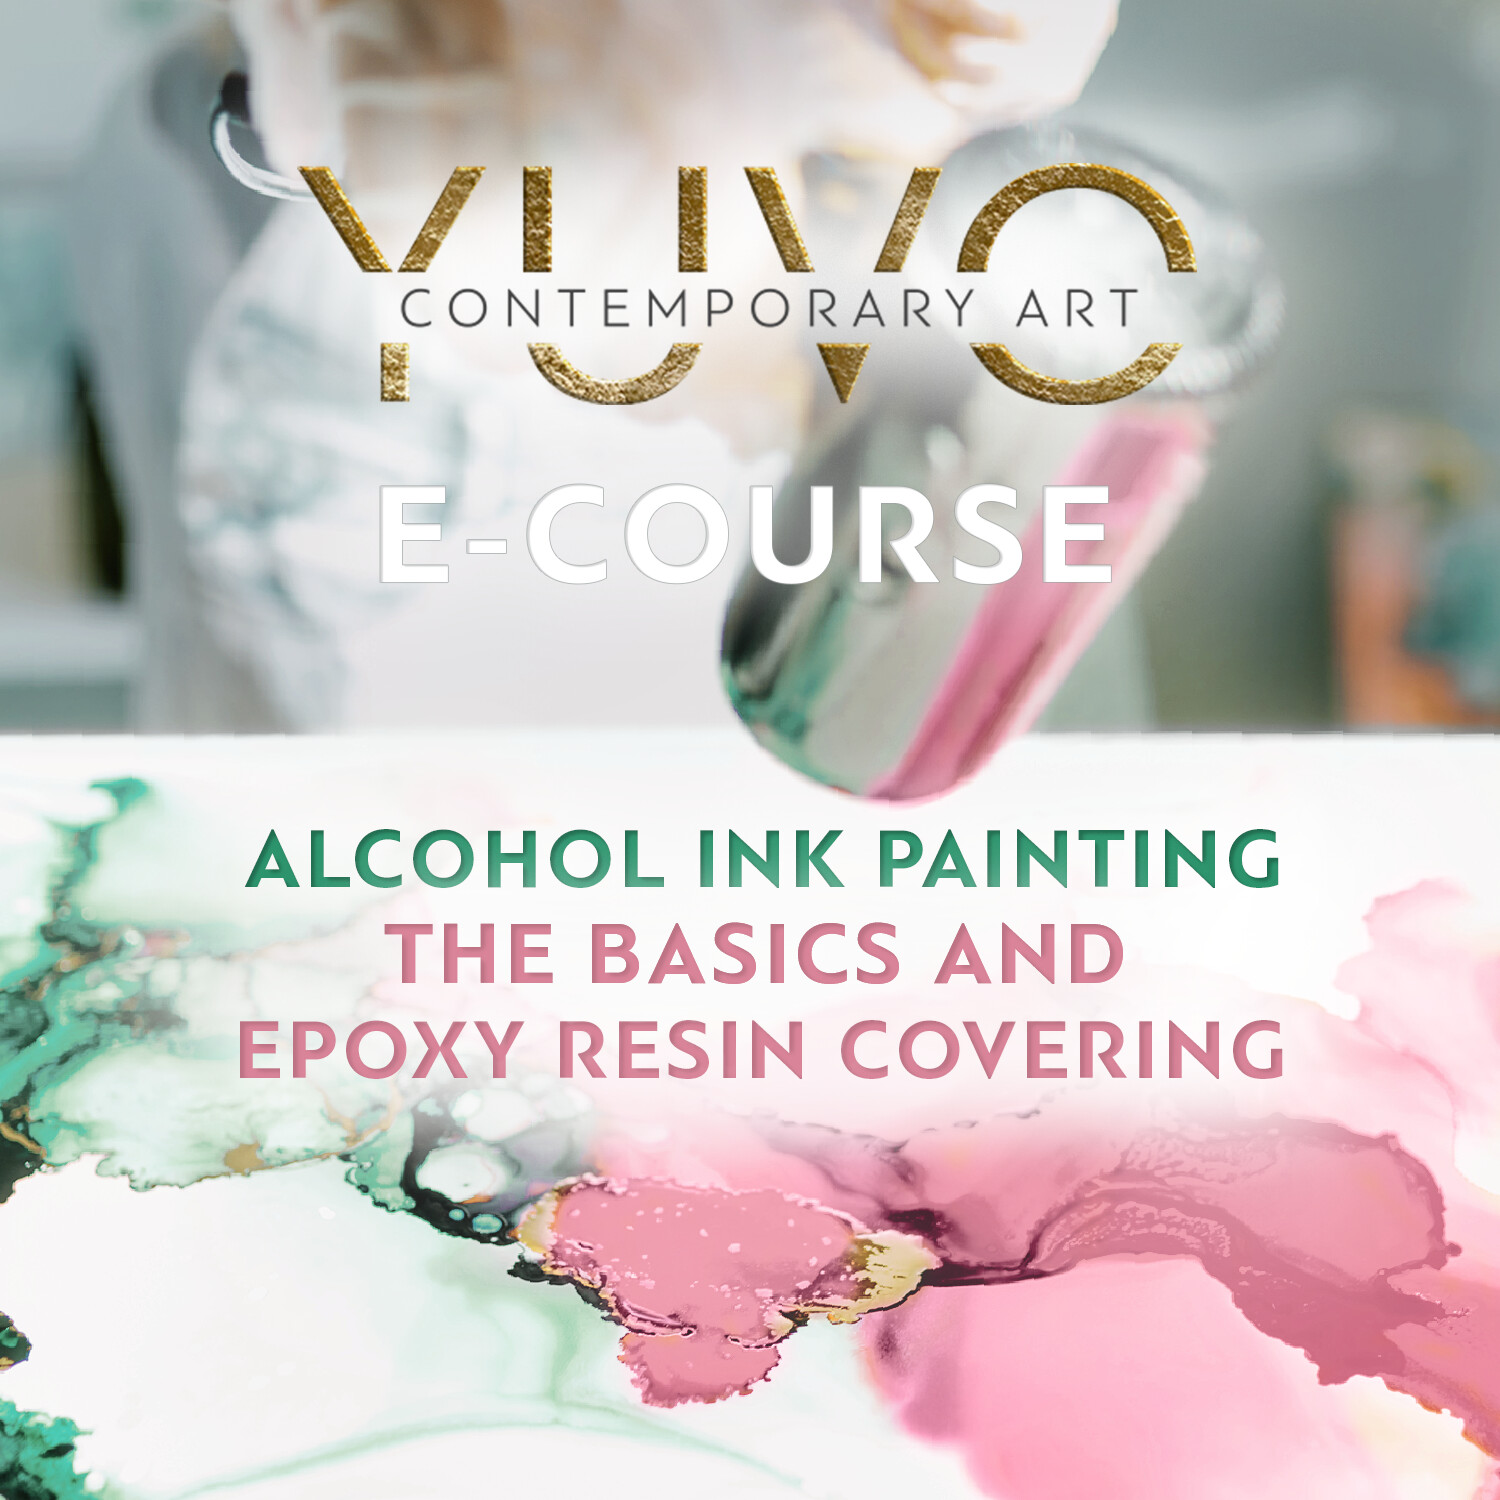 Online lesson on the basic by Julia VUYOGallery (English!)